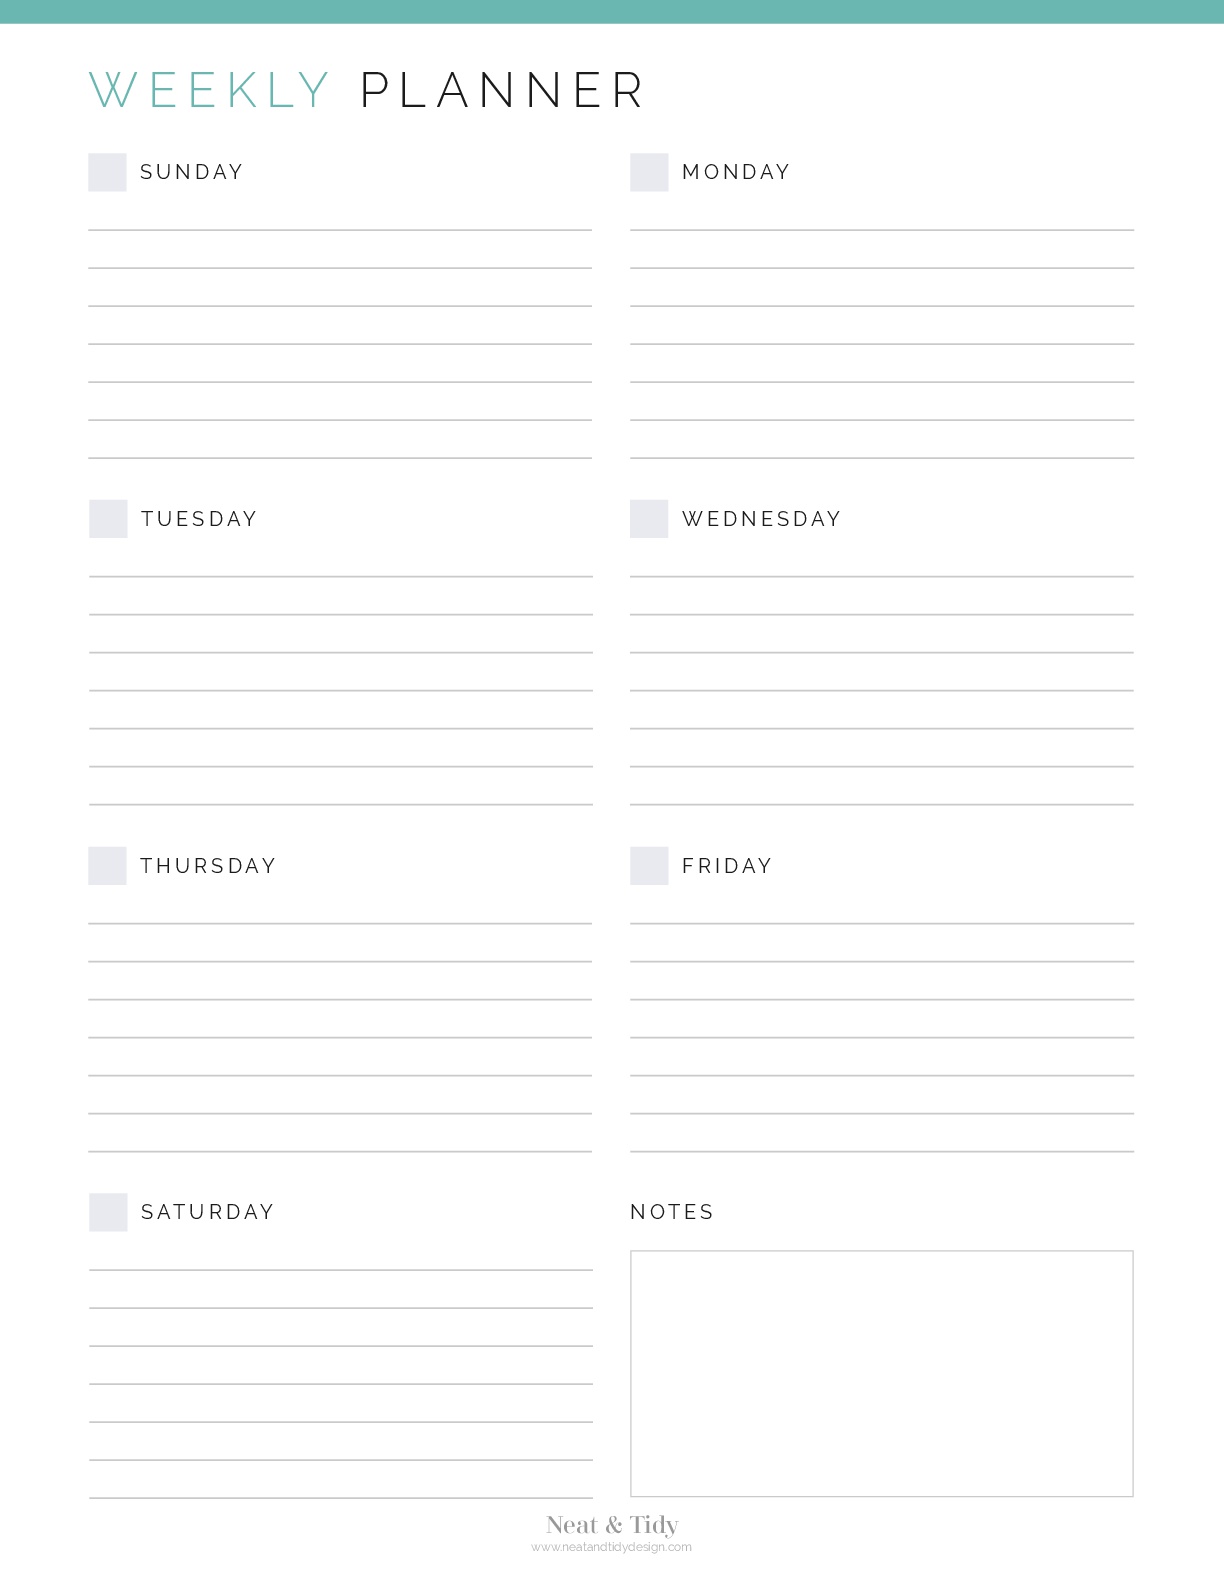 Weekly Planner v3 - Neat and Tidy Design